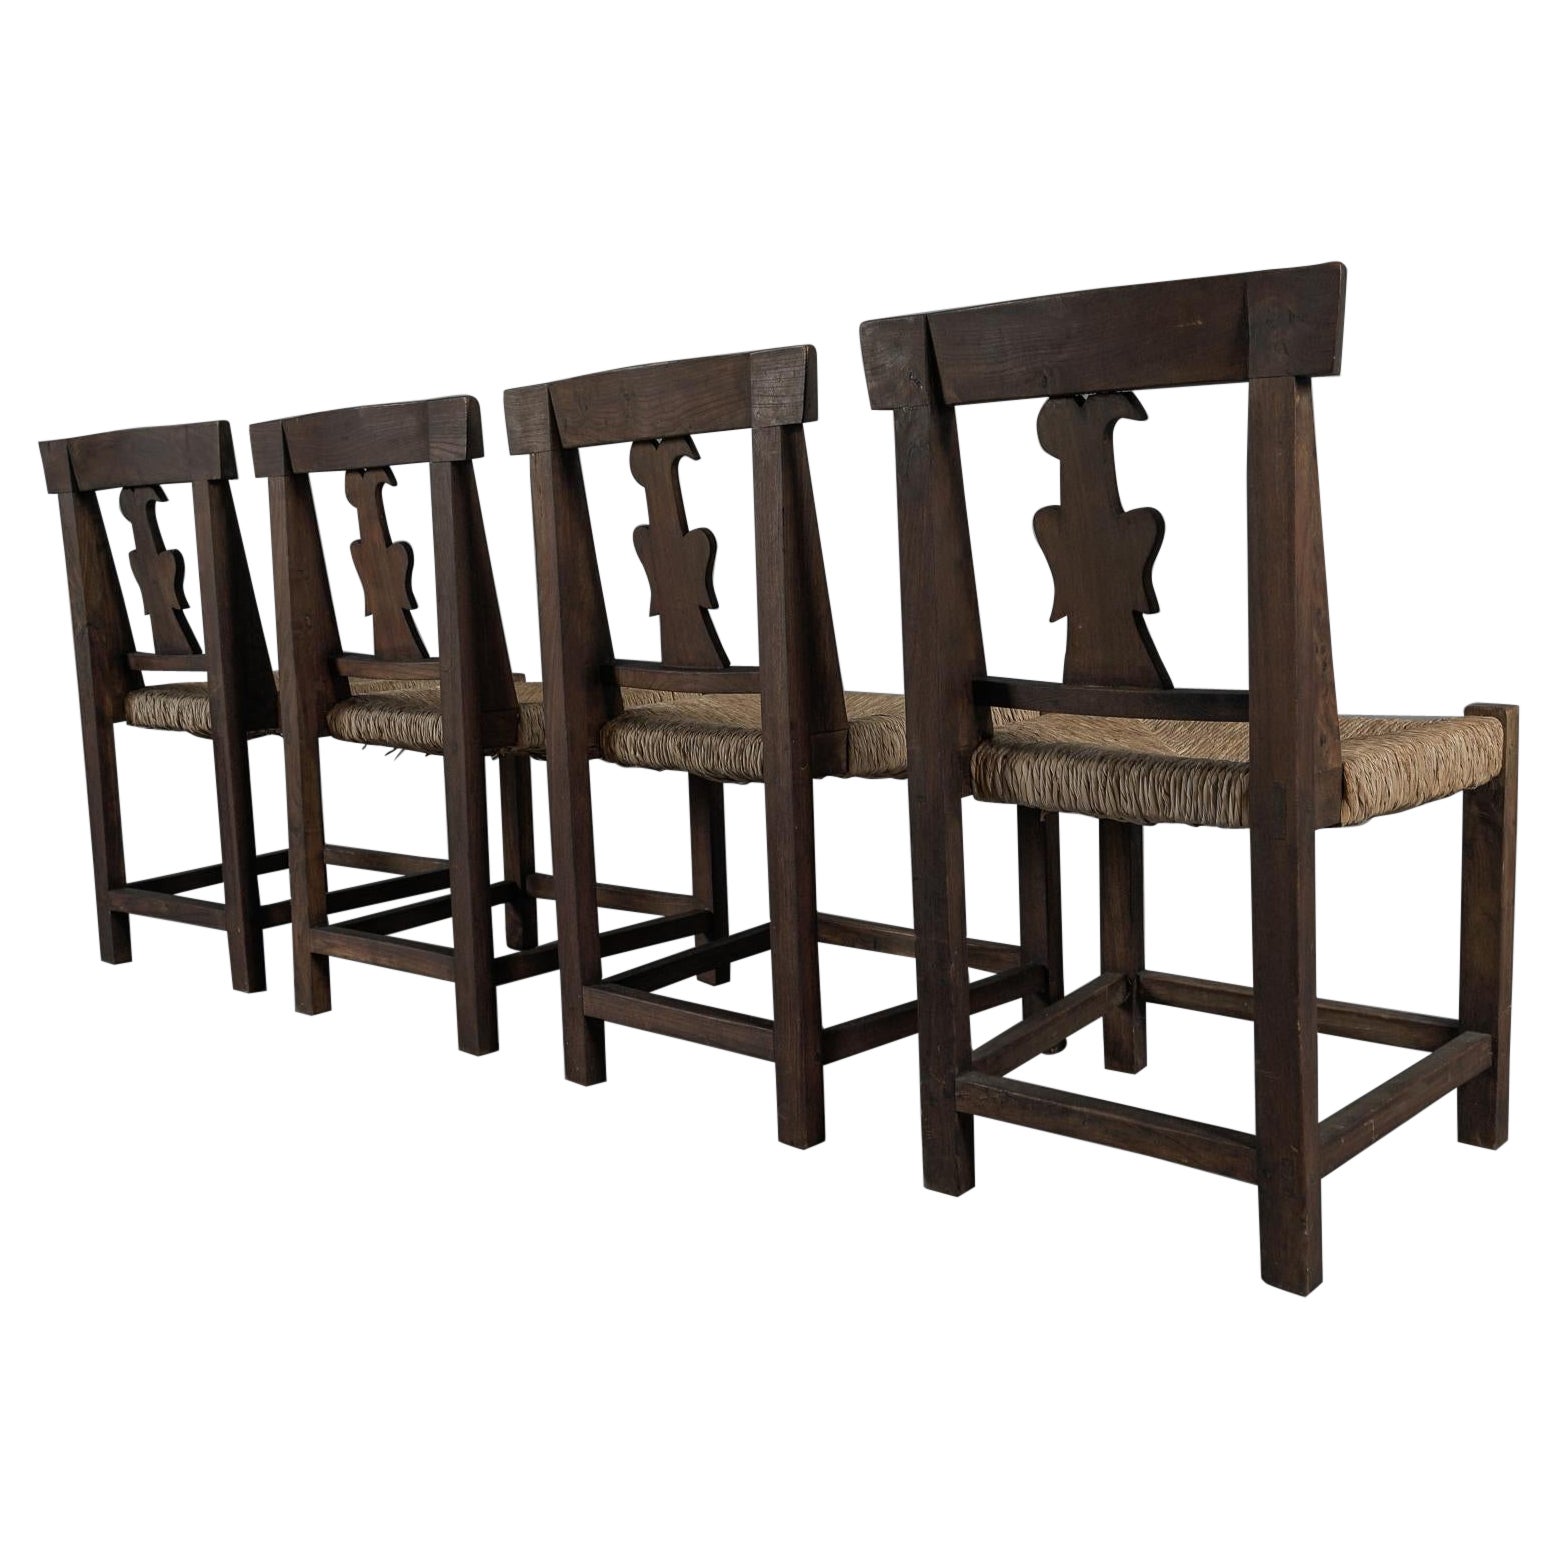 Set of 4 French Provincial Wood & Seagrass Chairs, 1960s Mid-Century Modern For Sale